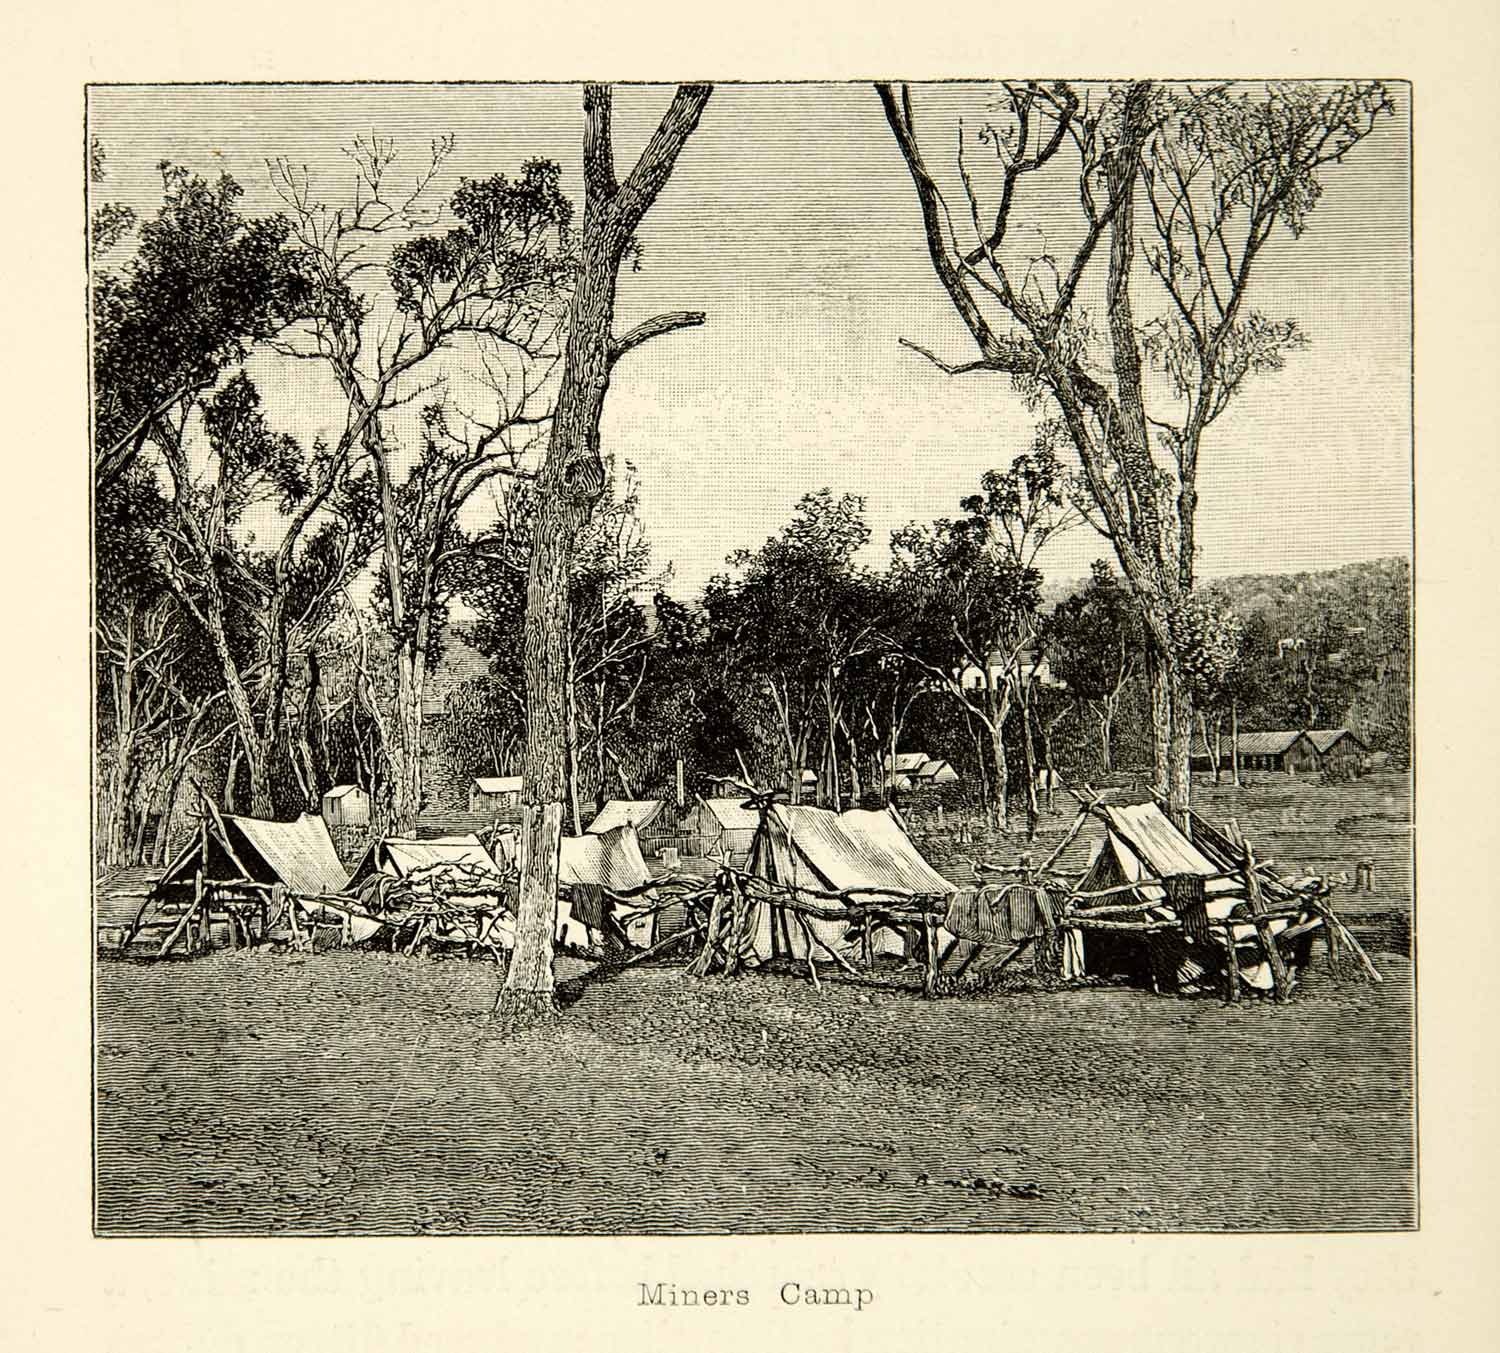 1887 Wood Engraving Art Mining Camp Tent Bivouac Outdoors Wooden Fence XGXC6